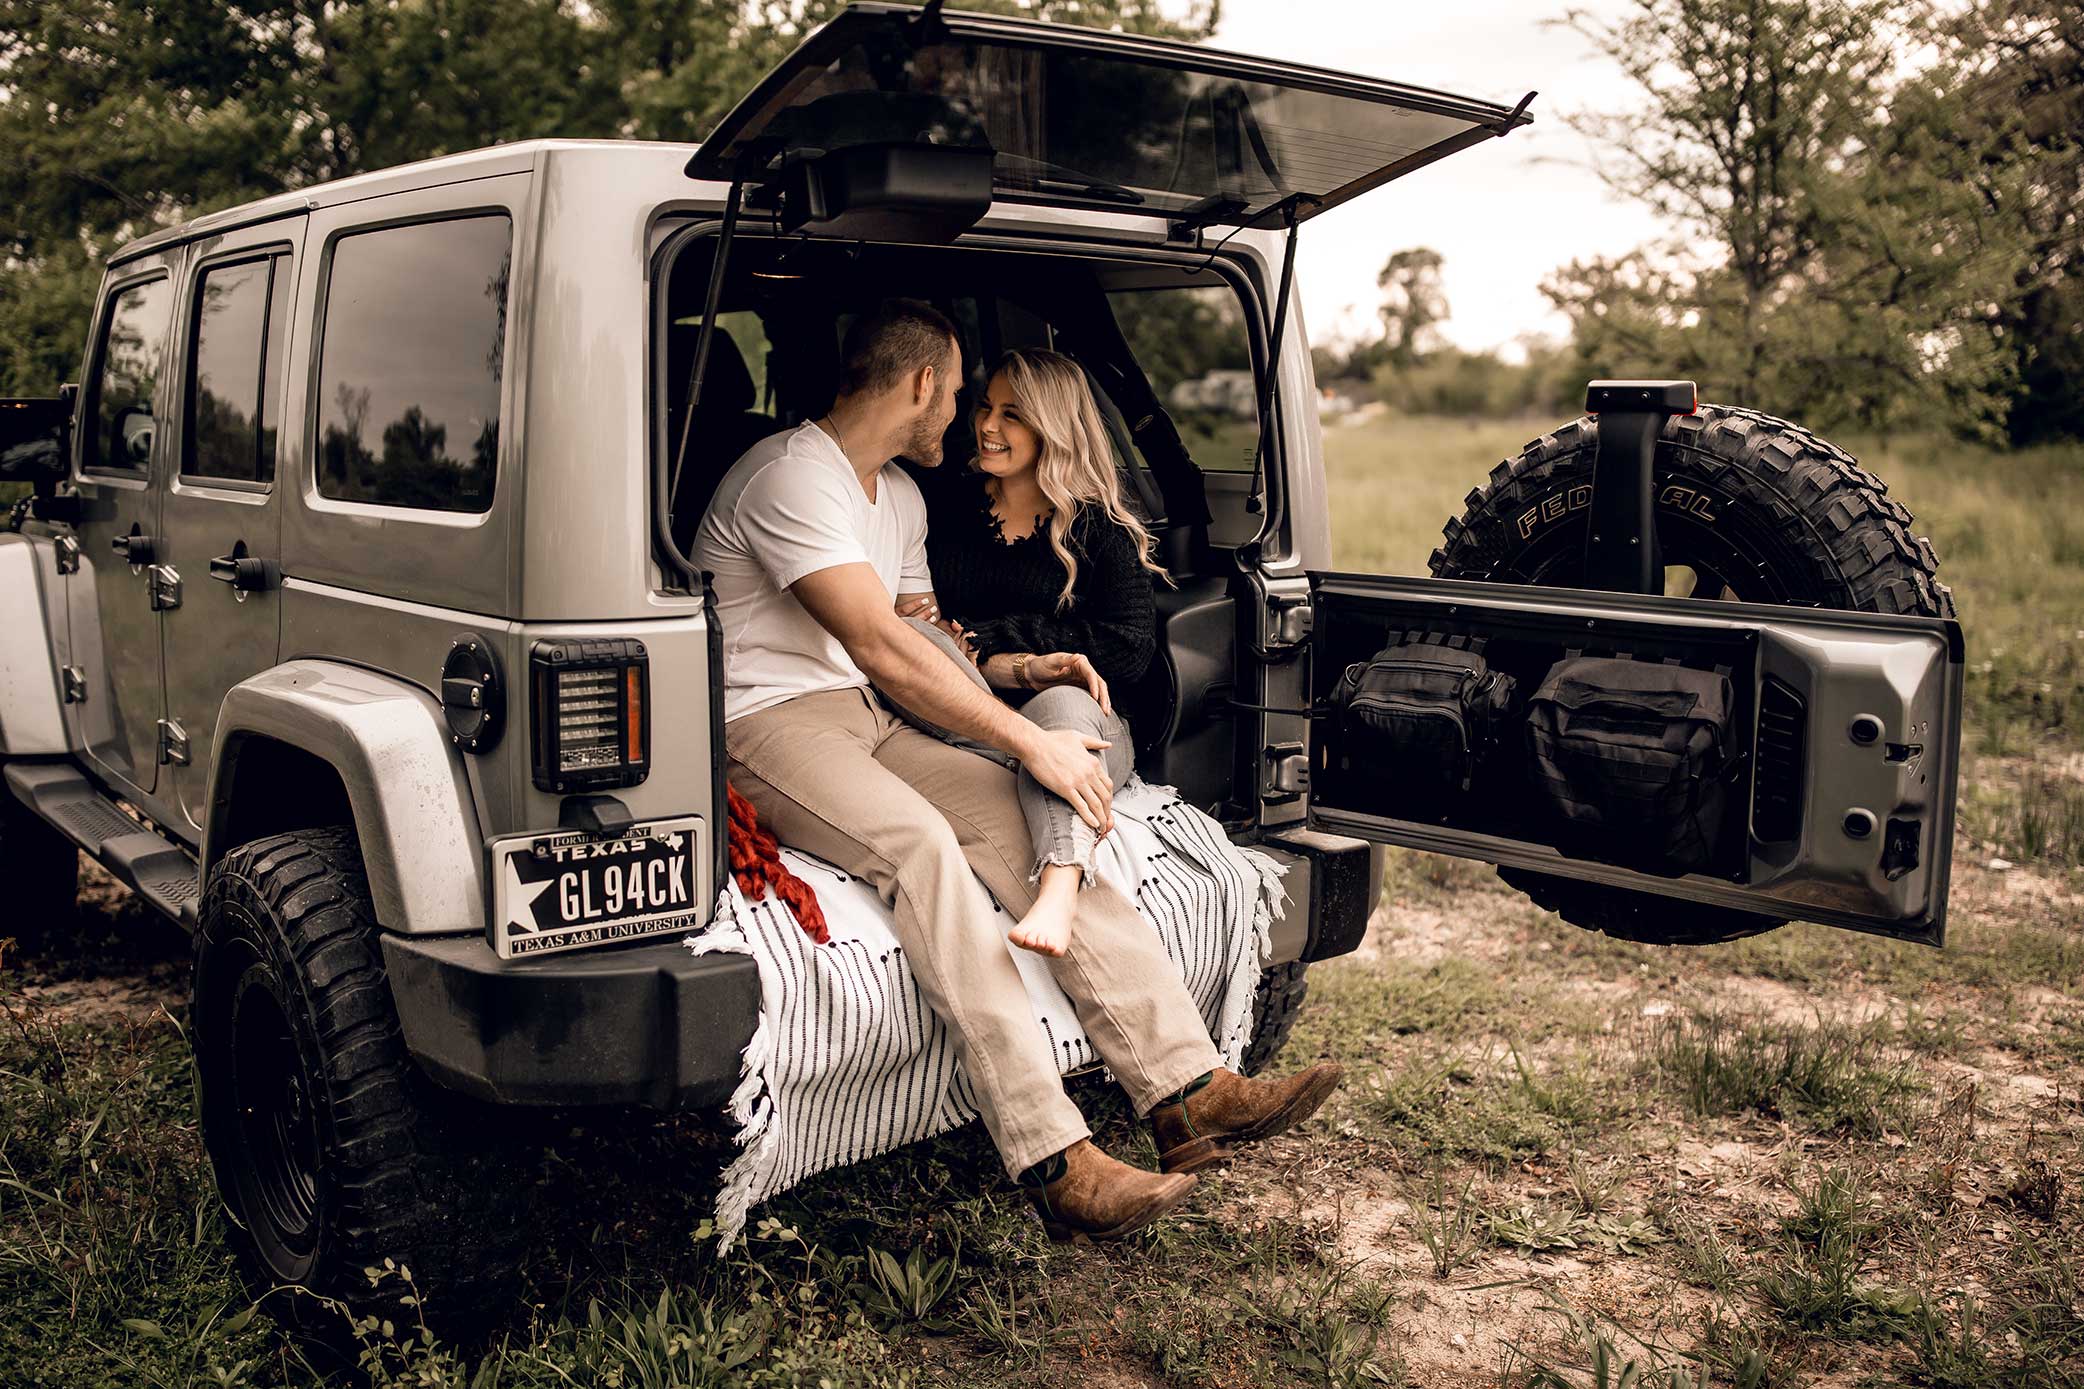 shelby-schiller-photography-lifestyle-couples-remi-colt-outdoor-jeep-adventure-2.jpg